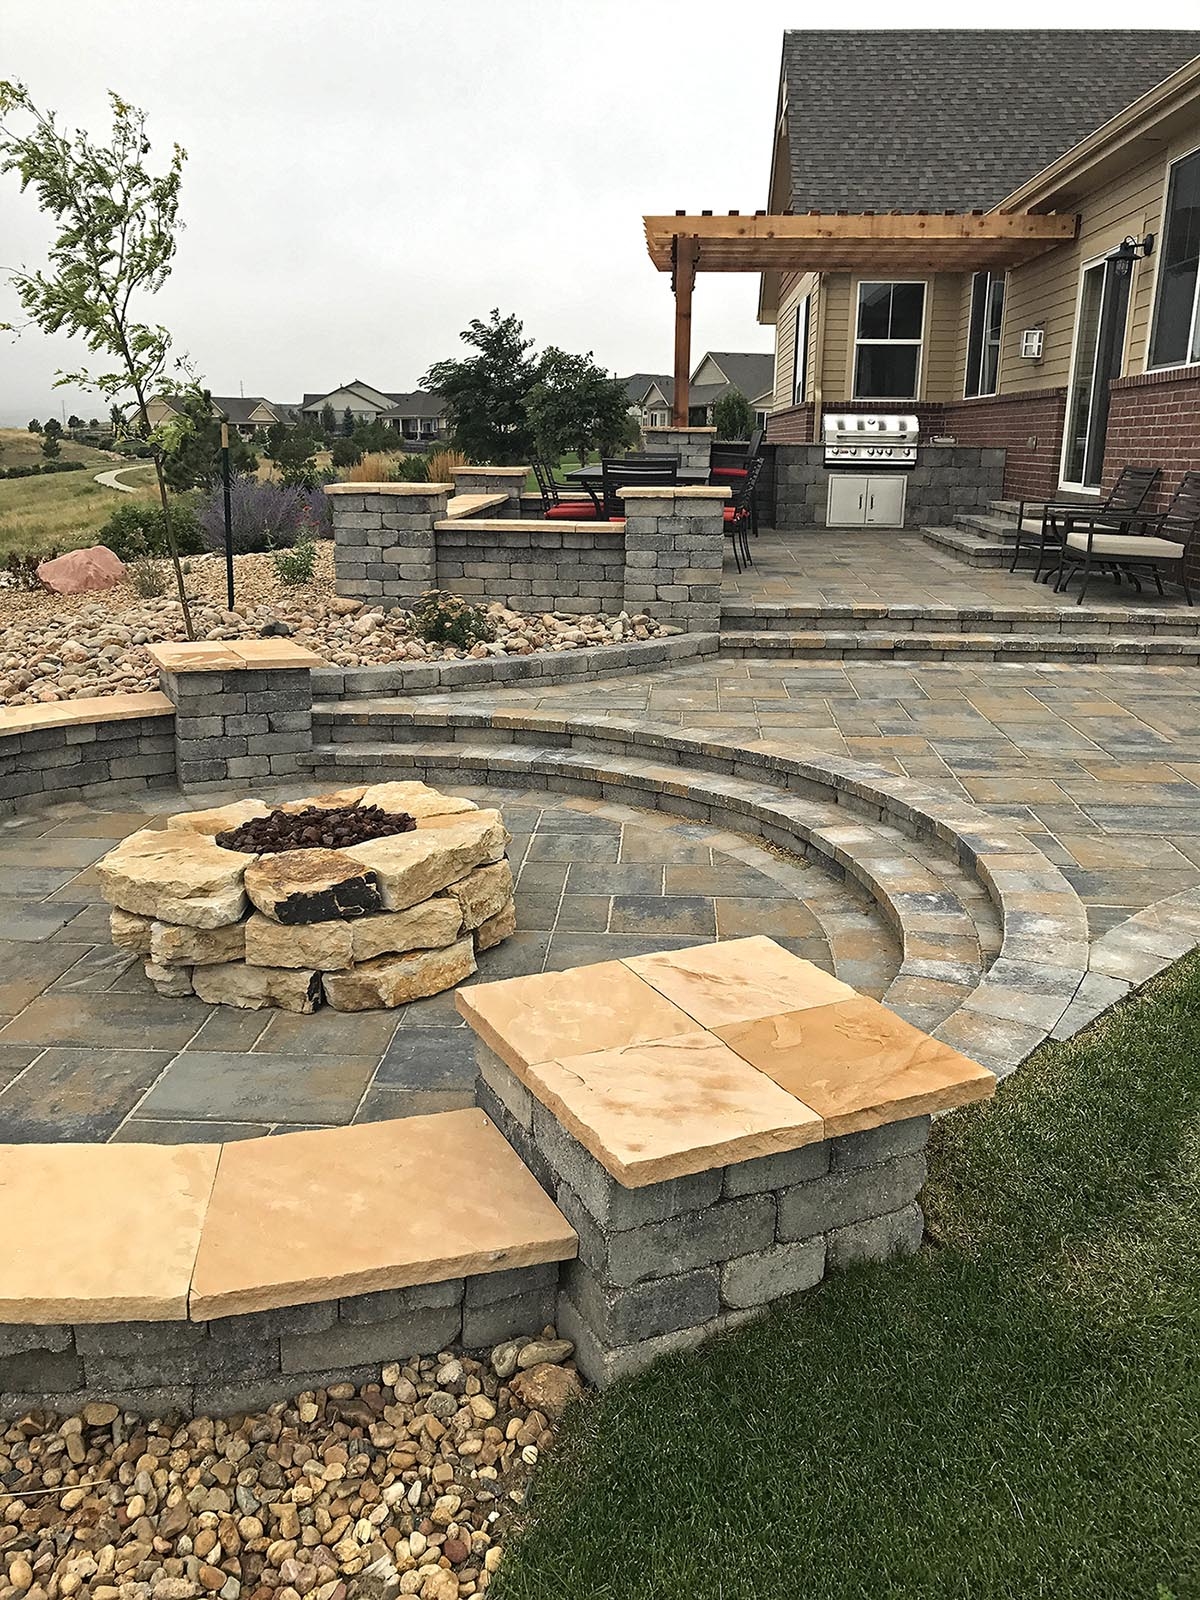 Outdoor living features can transform a yard, maximizing the livable space and providing enjoyment for your family